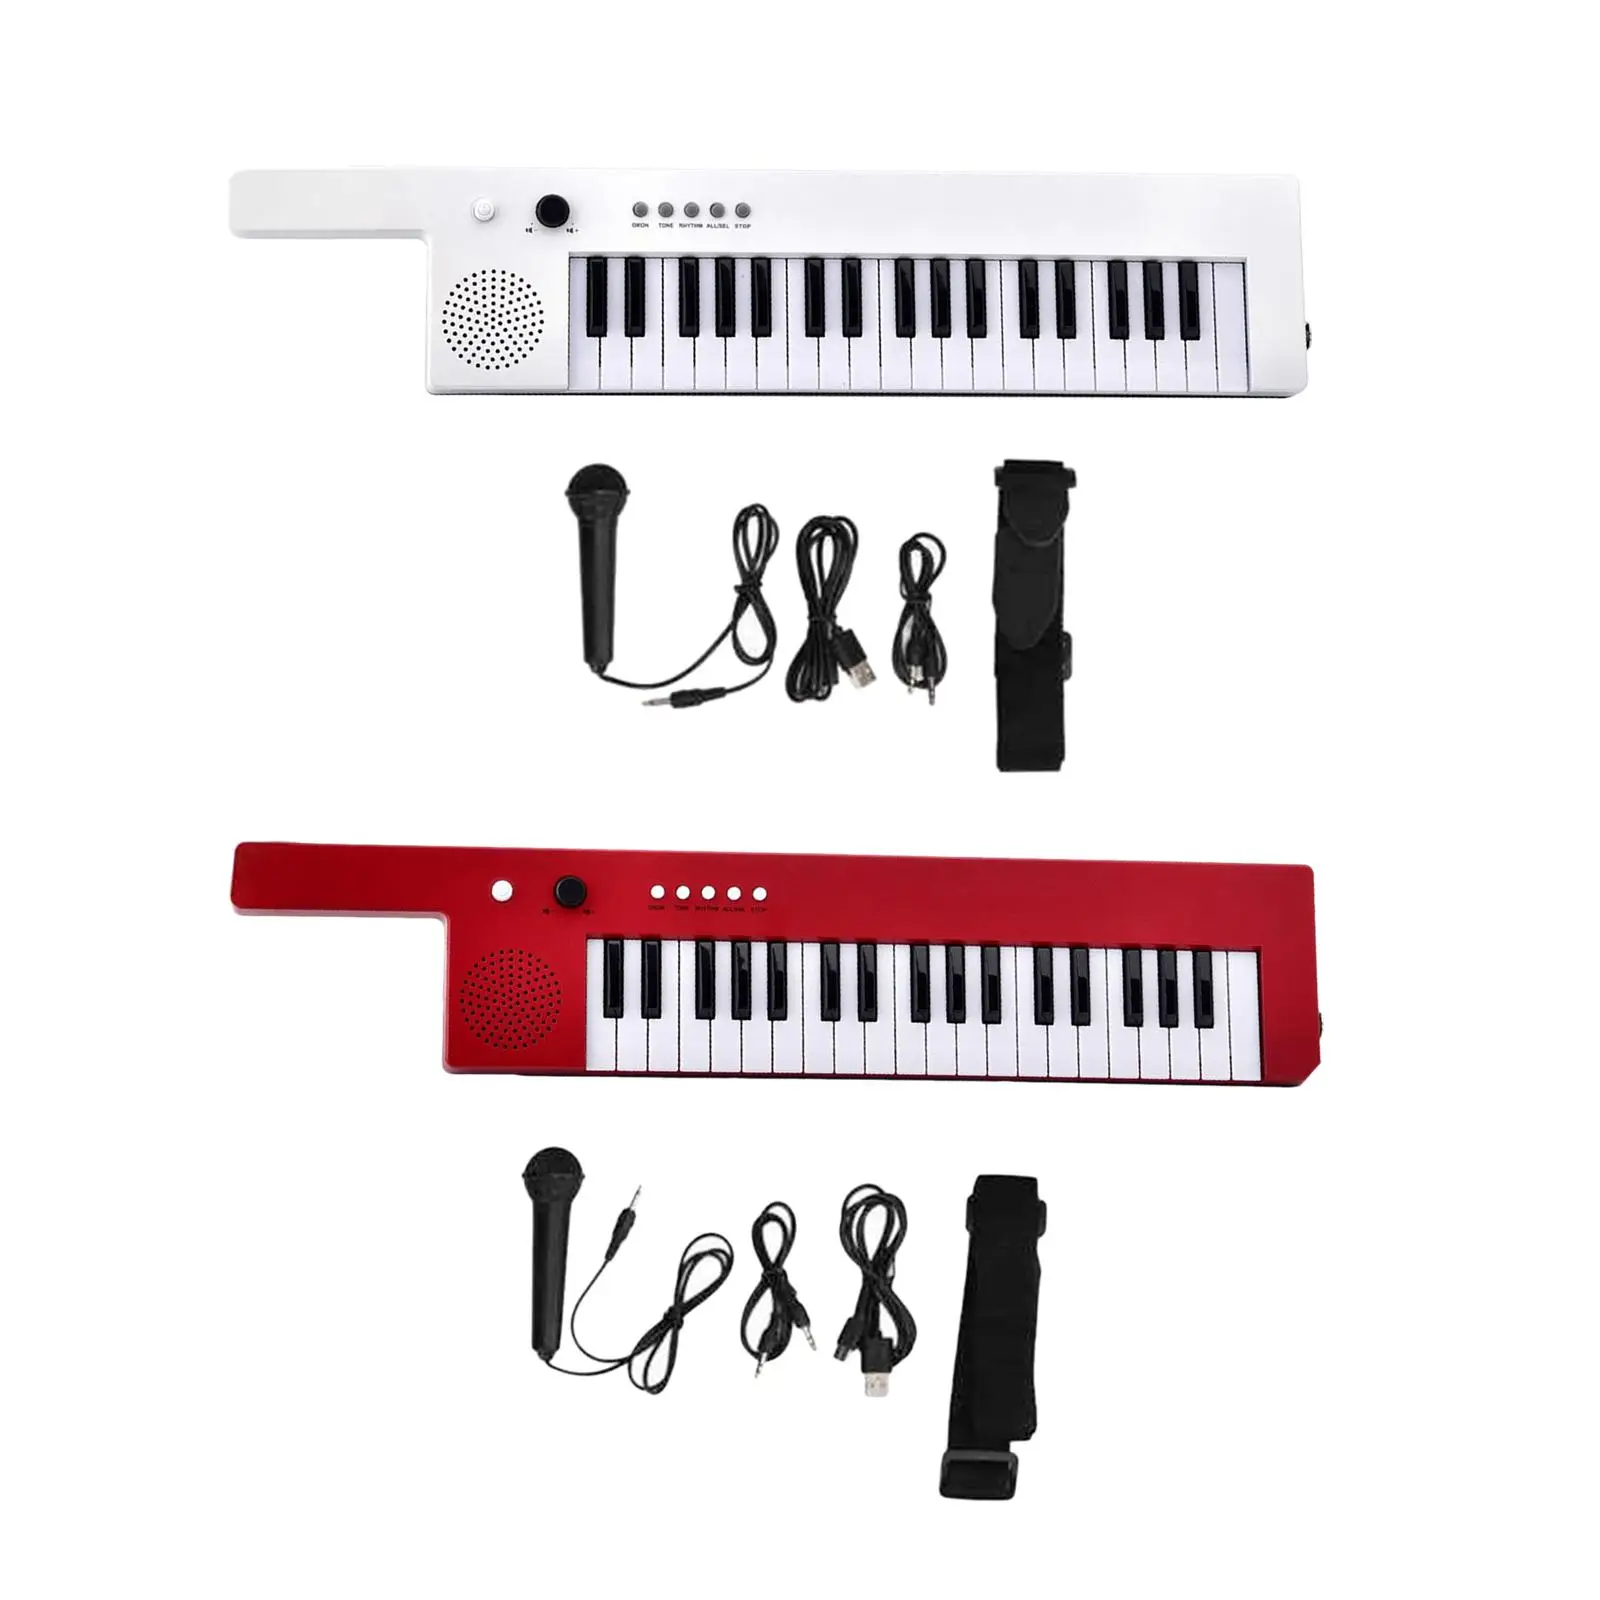 

Musical Keyboard Piano Portable Multifunctional Practical 37 Keys Digital Music Piano Keyboard for Beginner Learning Gifts Show